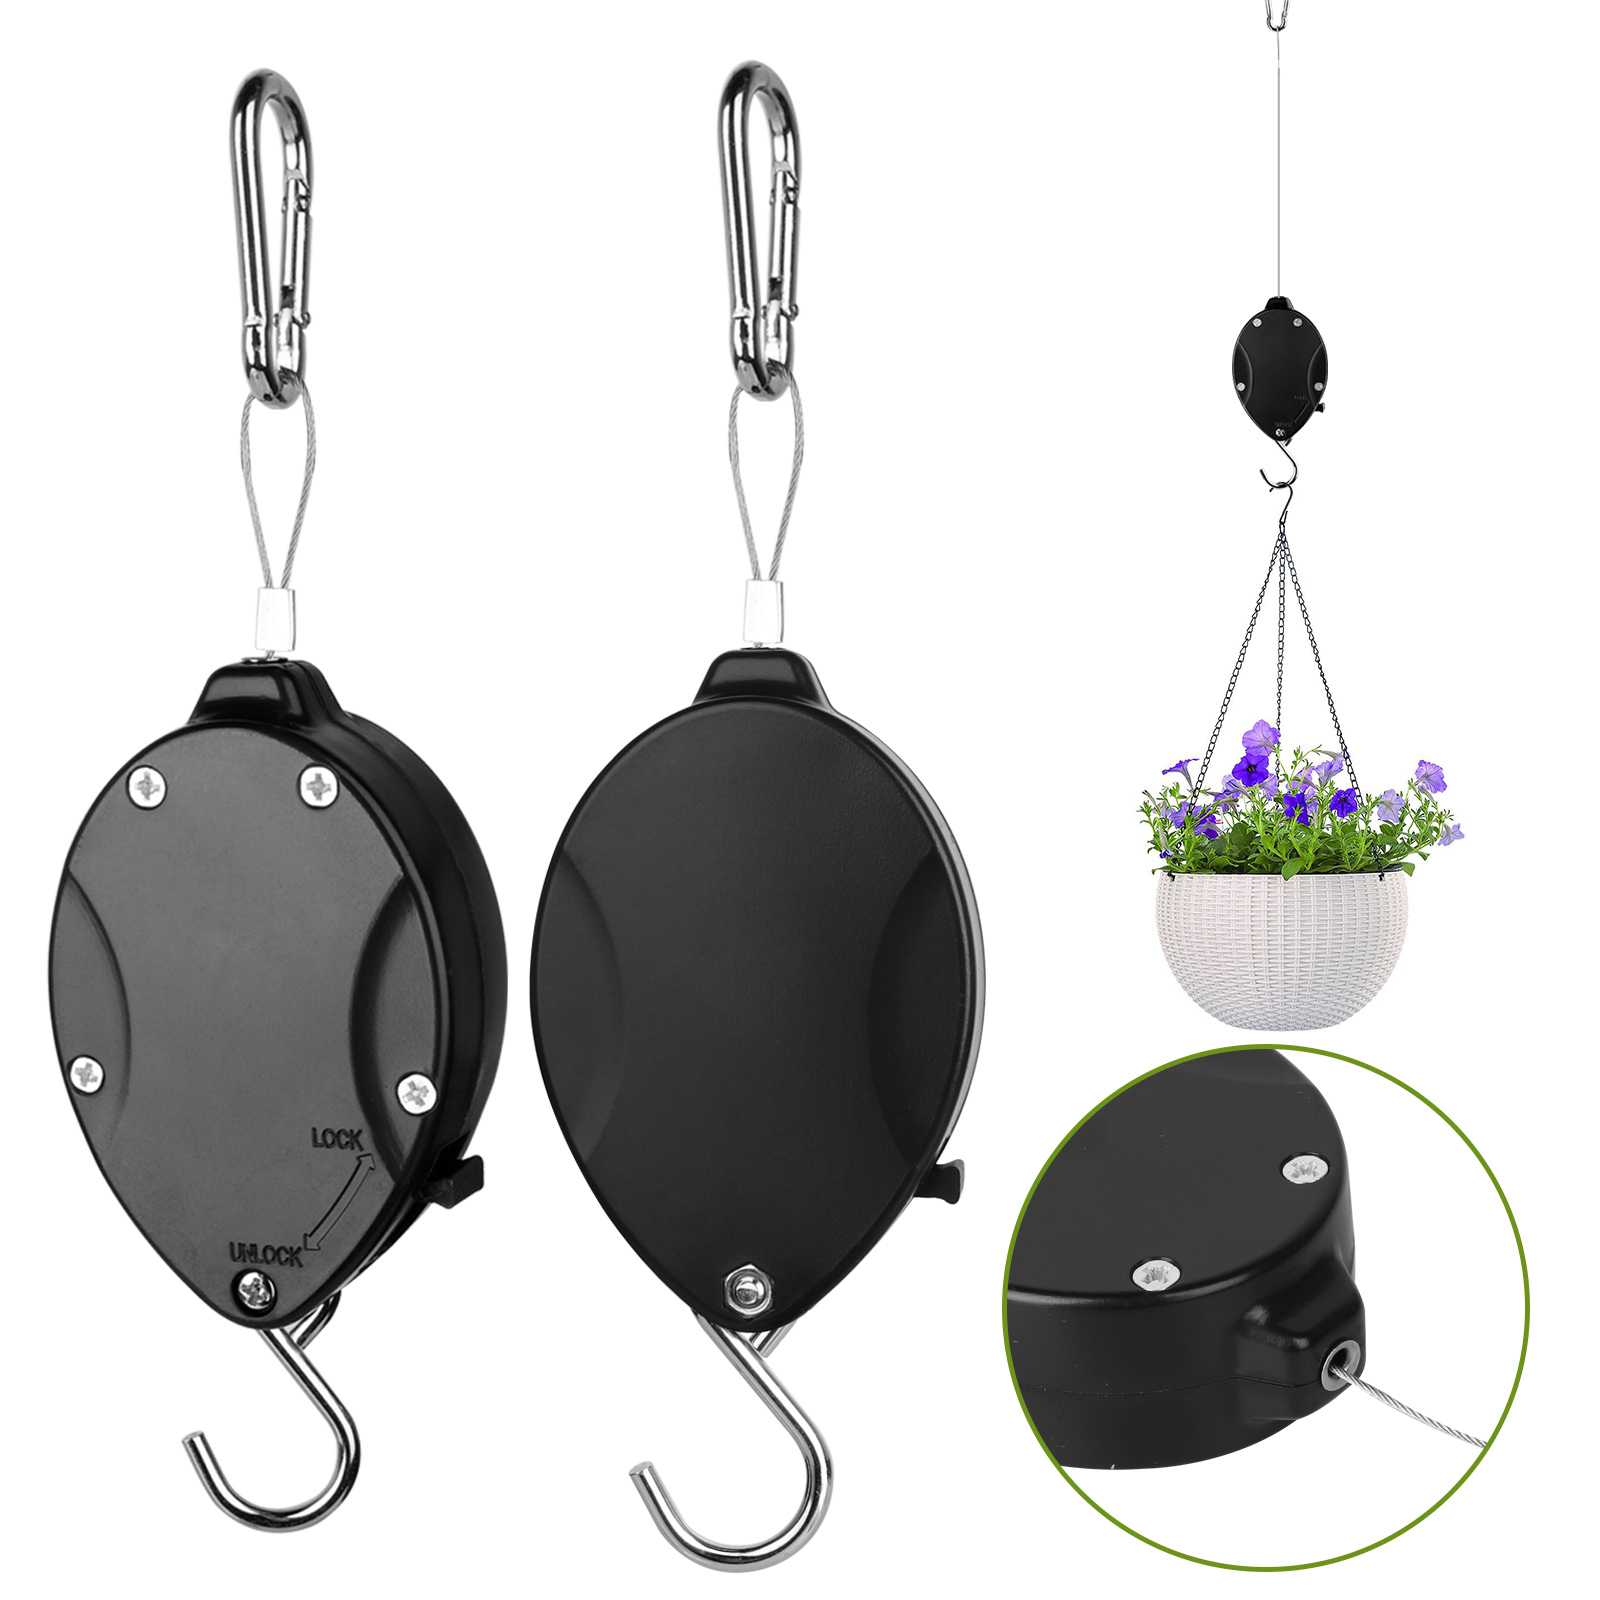 2pcs Retractable Plant Pulley with Locking, TSV Adjustable Plant Hanger Hook, Easy Watering for Hanging Plants, Garden Flower Baskets, Pots and Bird Feeders, Plastic, Black - image 1 of 9